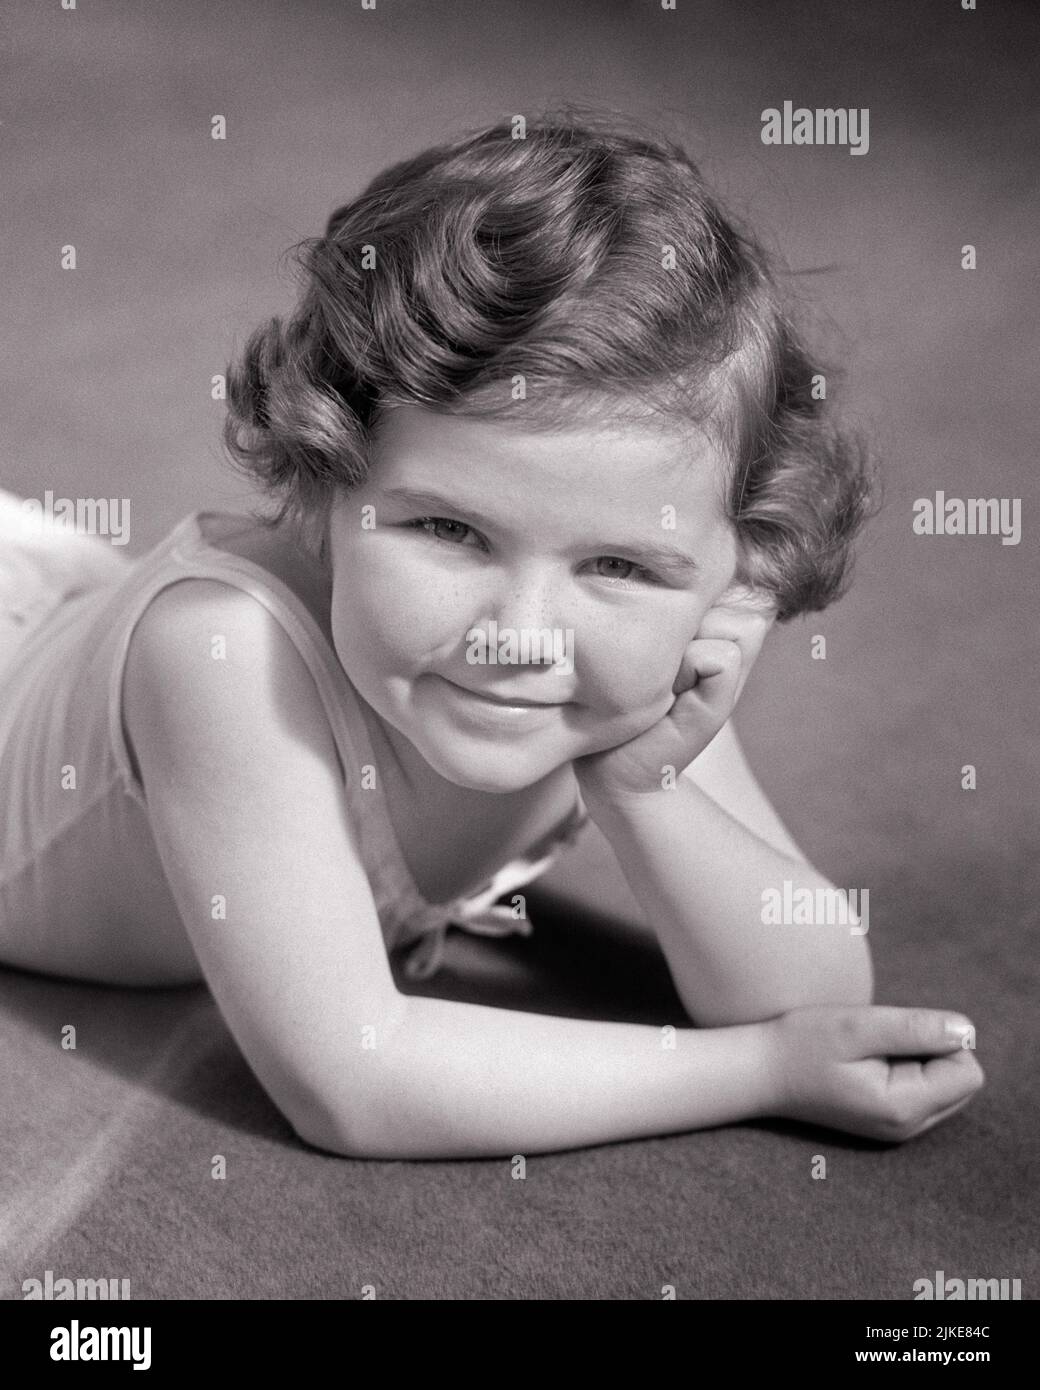 1930s CUTE LITTLE GIRL LYING ON HER STOMACH RESTING HER HEAD IN HER HAND SMILING LOOKING UP AT CAMERA - j5122 HAR001 HARS B&W RESTING EYE CONTACT BRUNETTE PRETTY HAPPINESS CHEERFUL HIGH ANGLE STOMACH PRIDE SMILES JOYFUL STYLISH PLEASANT AGREEABLE CHARMING GROWTH JUVENILES LOOKING UP LOVABLE PLEASING RELAXATION ADORABLE APPEALING BLACK AND WHITE CAUCASIAN ETHNICITY HAR001 OLD FASHIONED Stock Photo